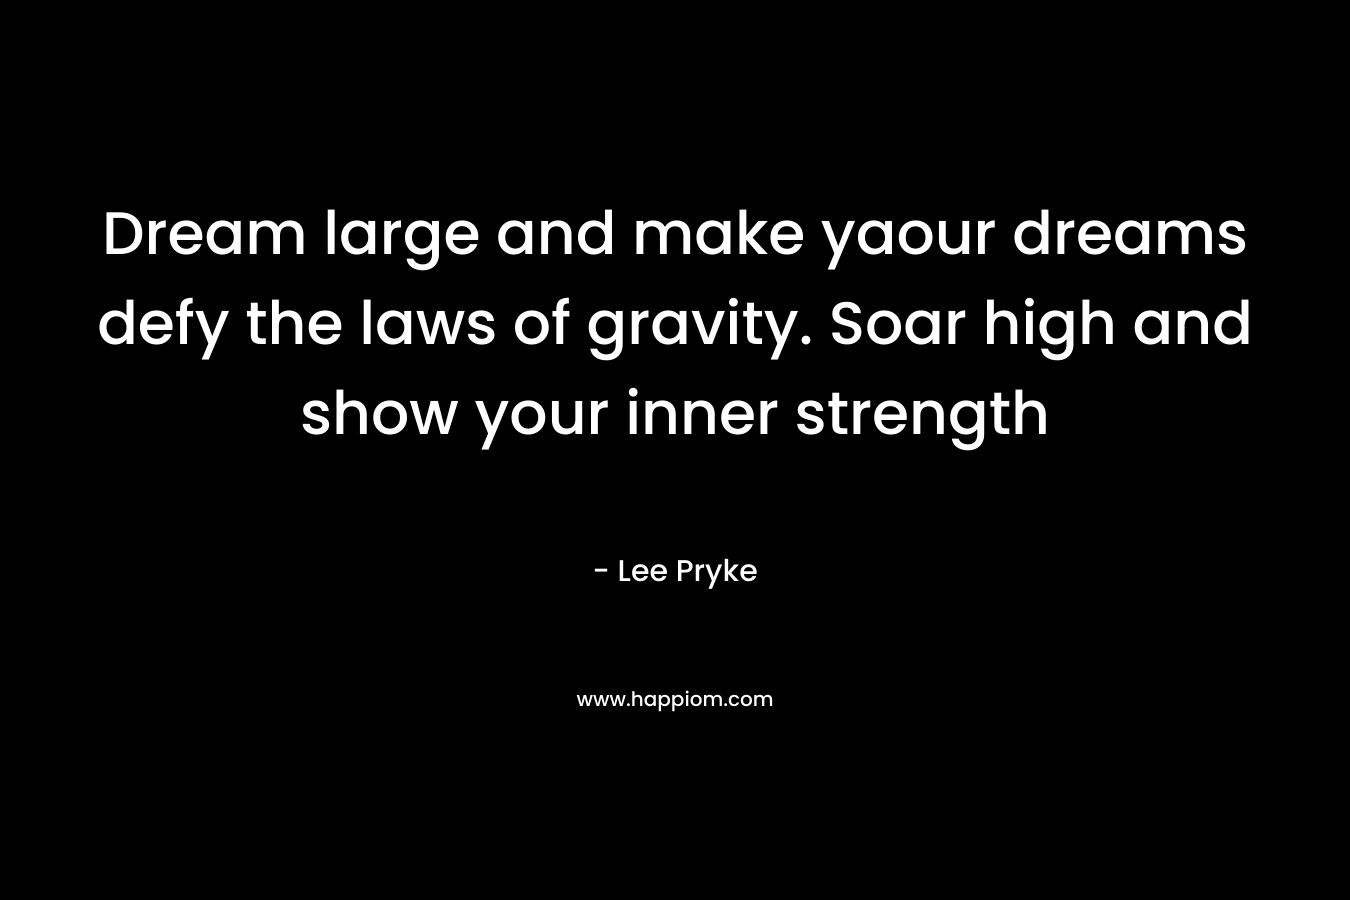 Dream large and make yaour dreams defy the laws of gravity. Soar high and show your inner strength